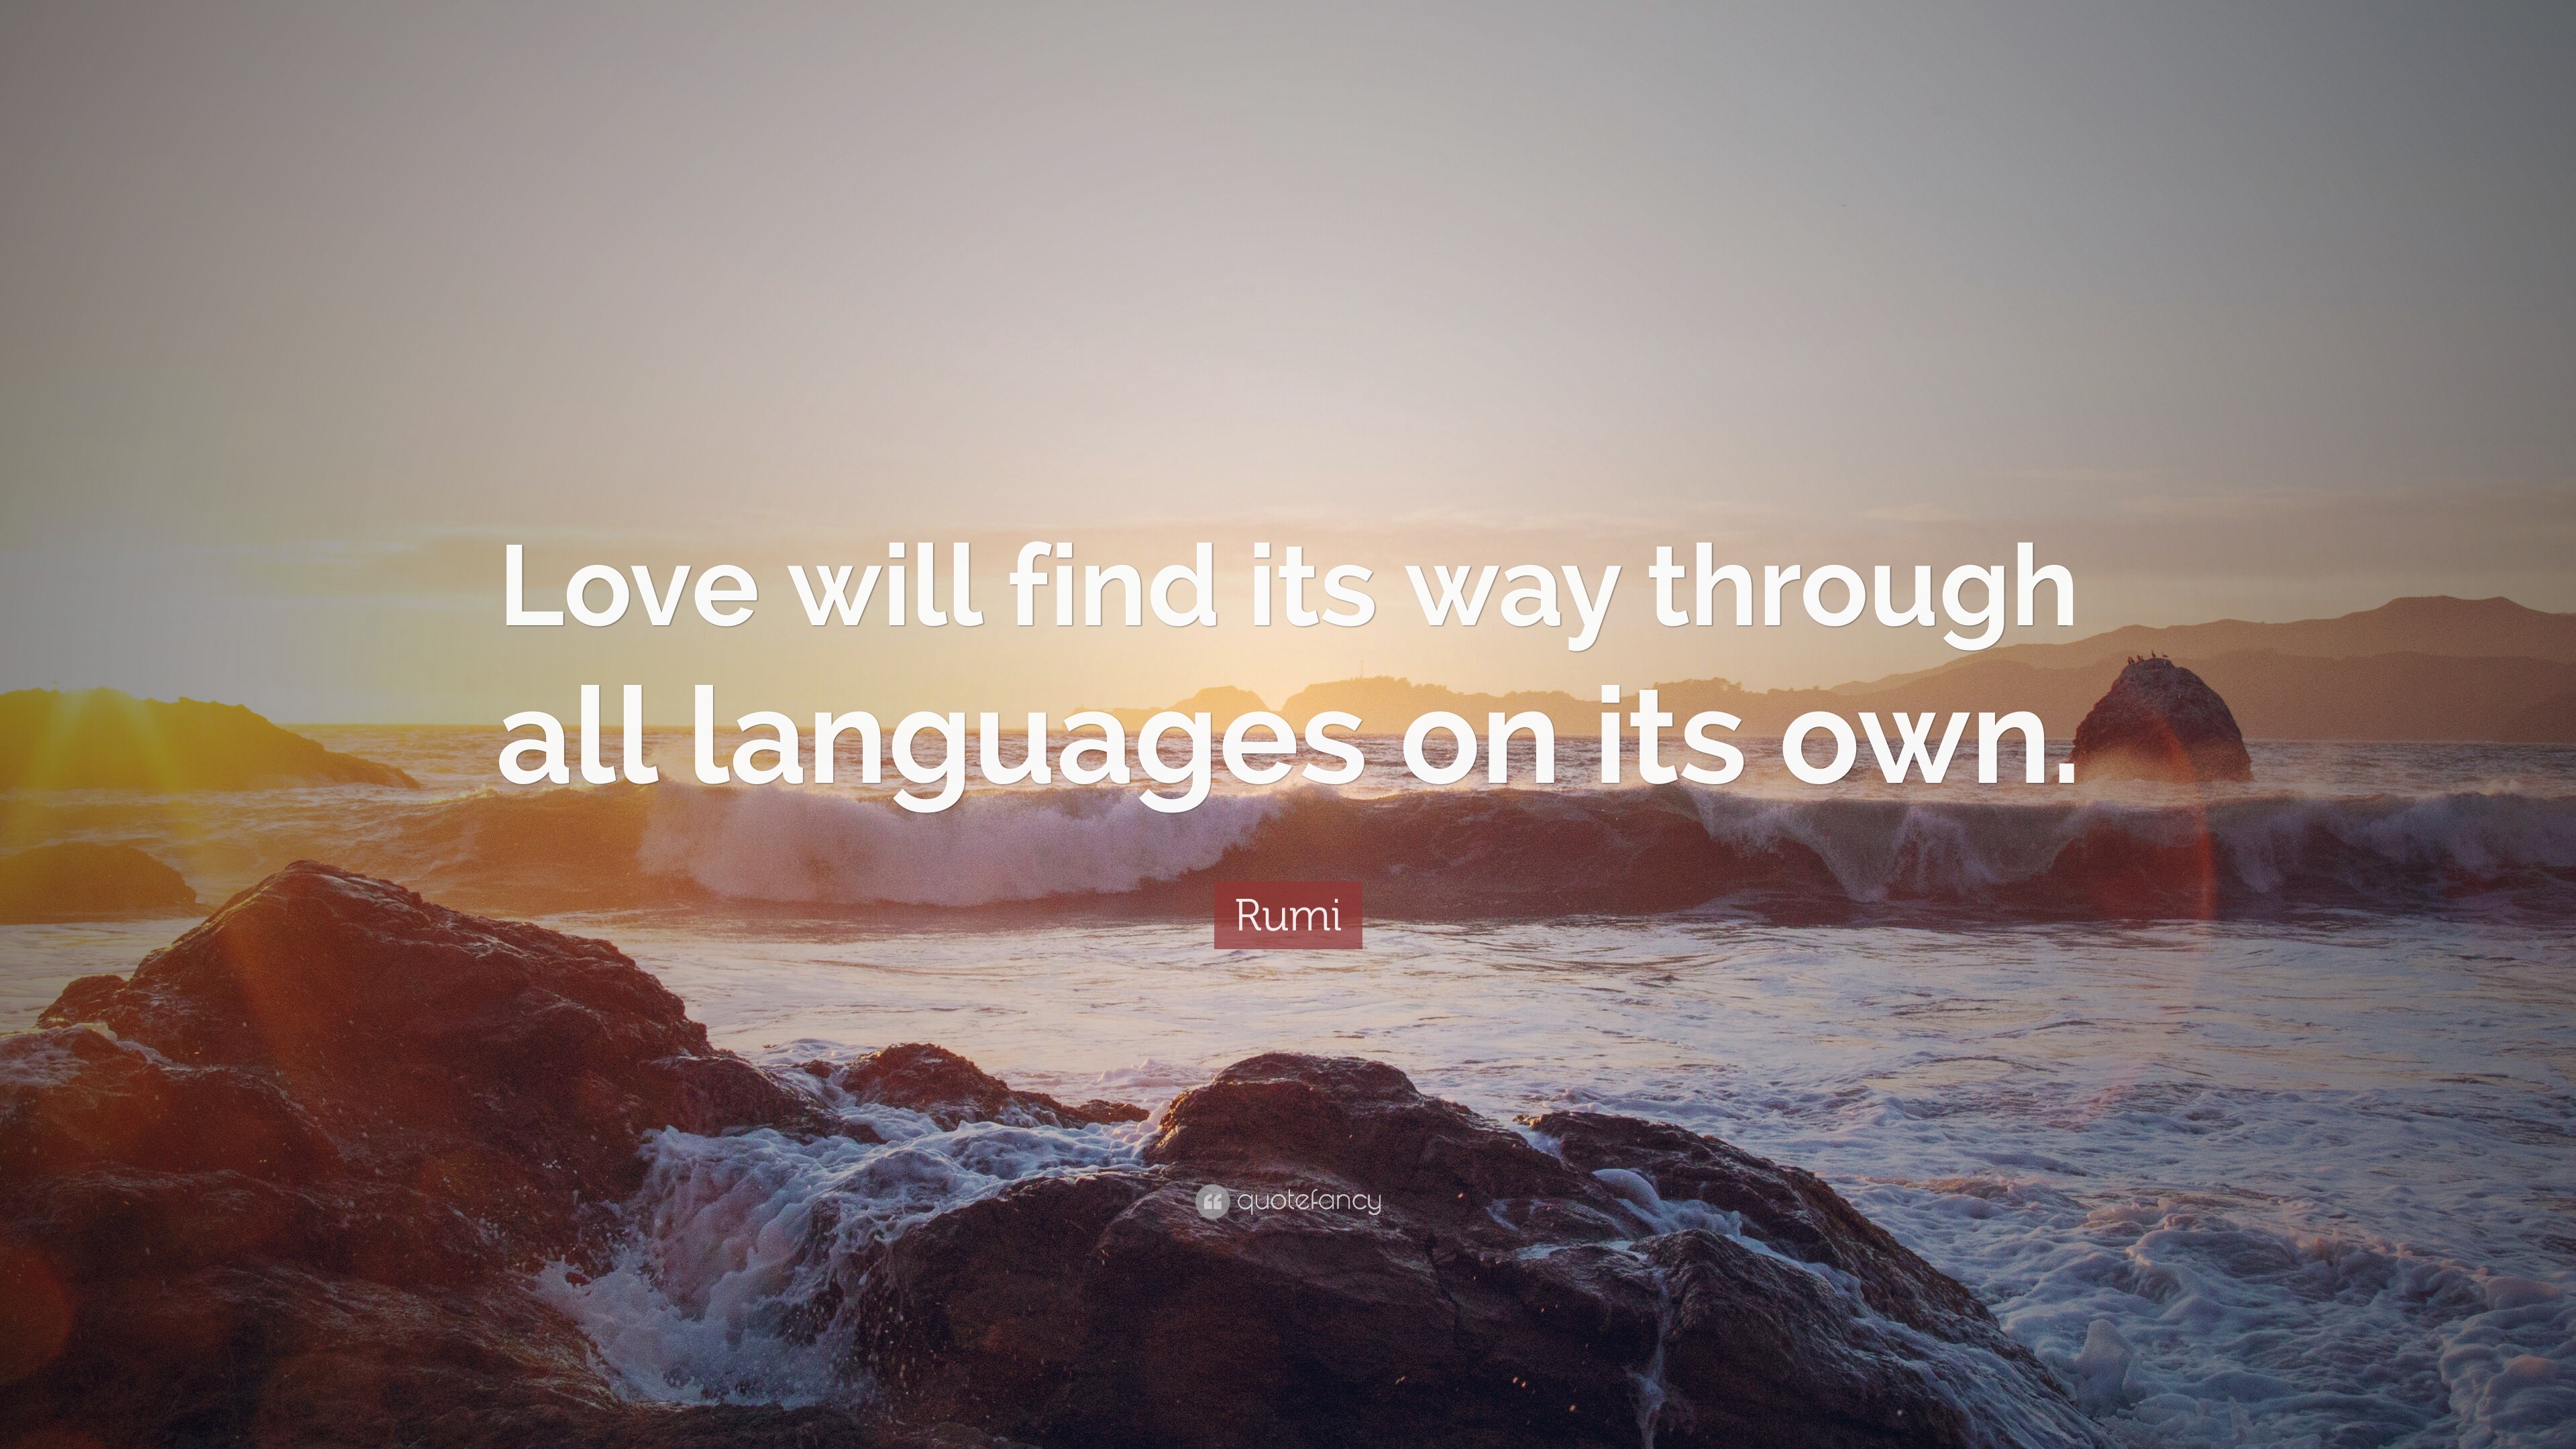 Rumi Quote “Love will find its way through all languages on its own